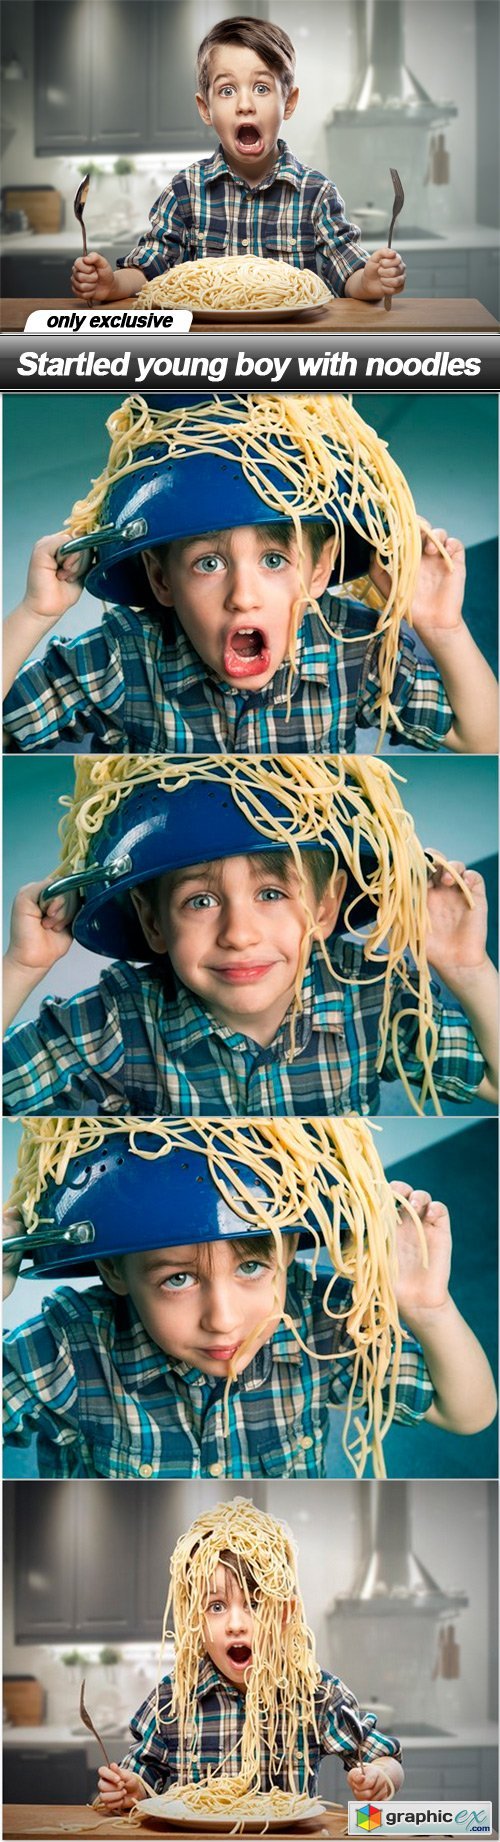 Startled young boy with noodles - 5 UHQ JPEG